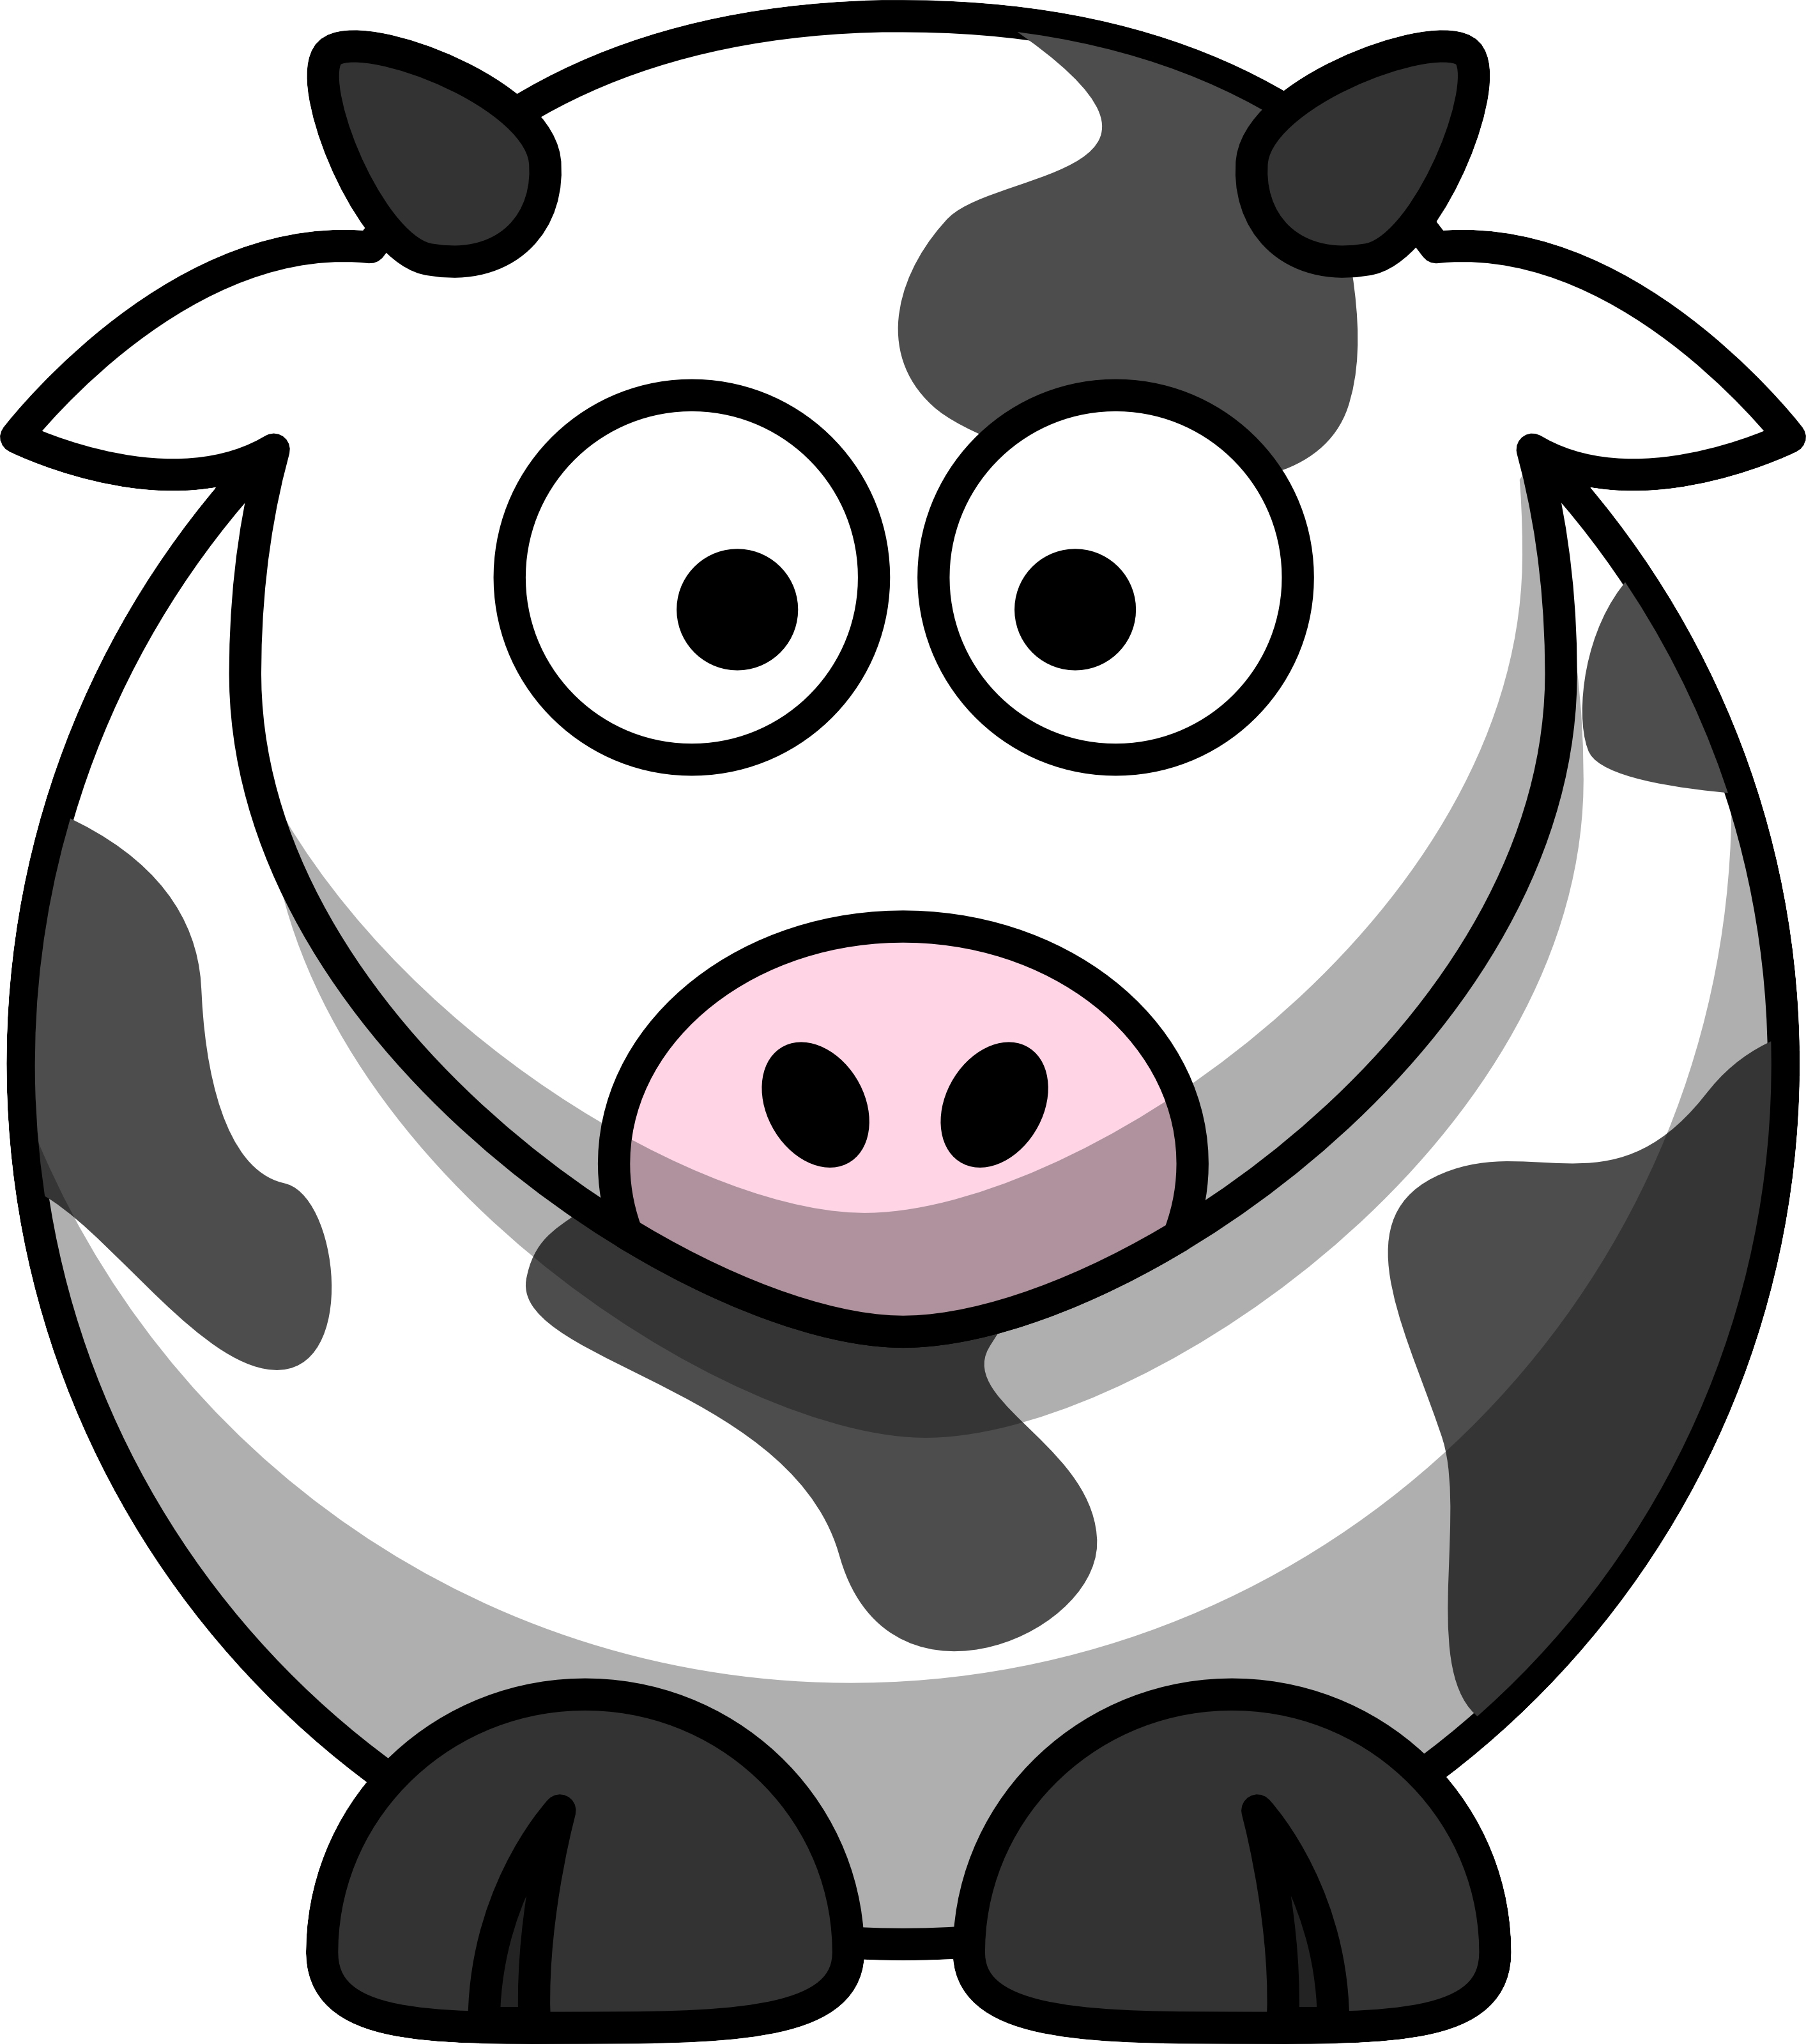 Cow Cartoon PNG Clipart